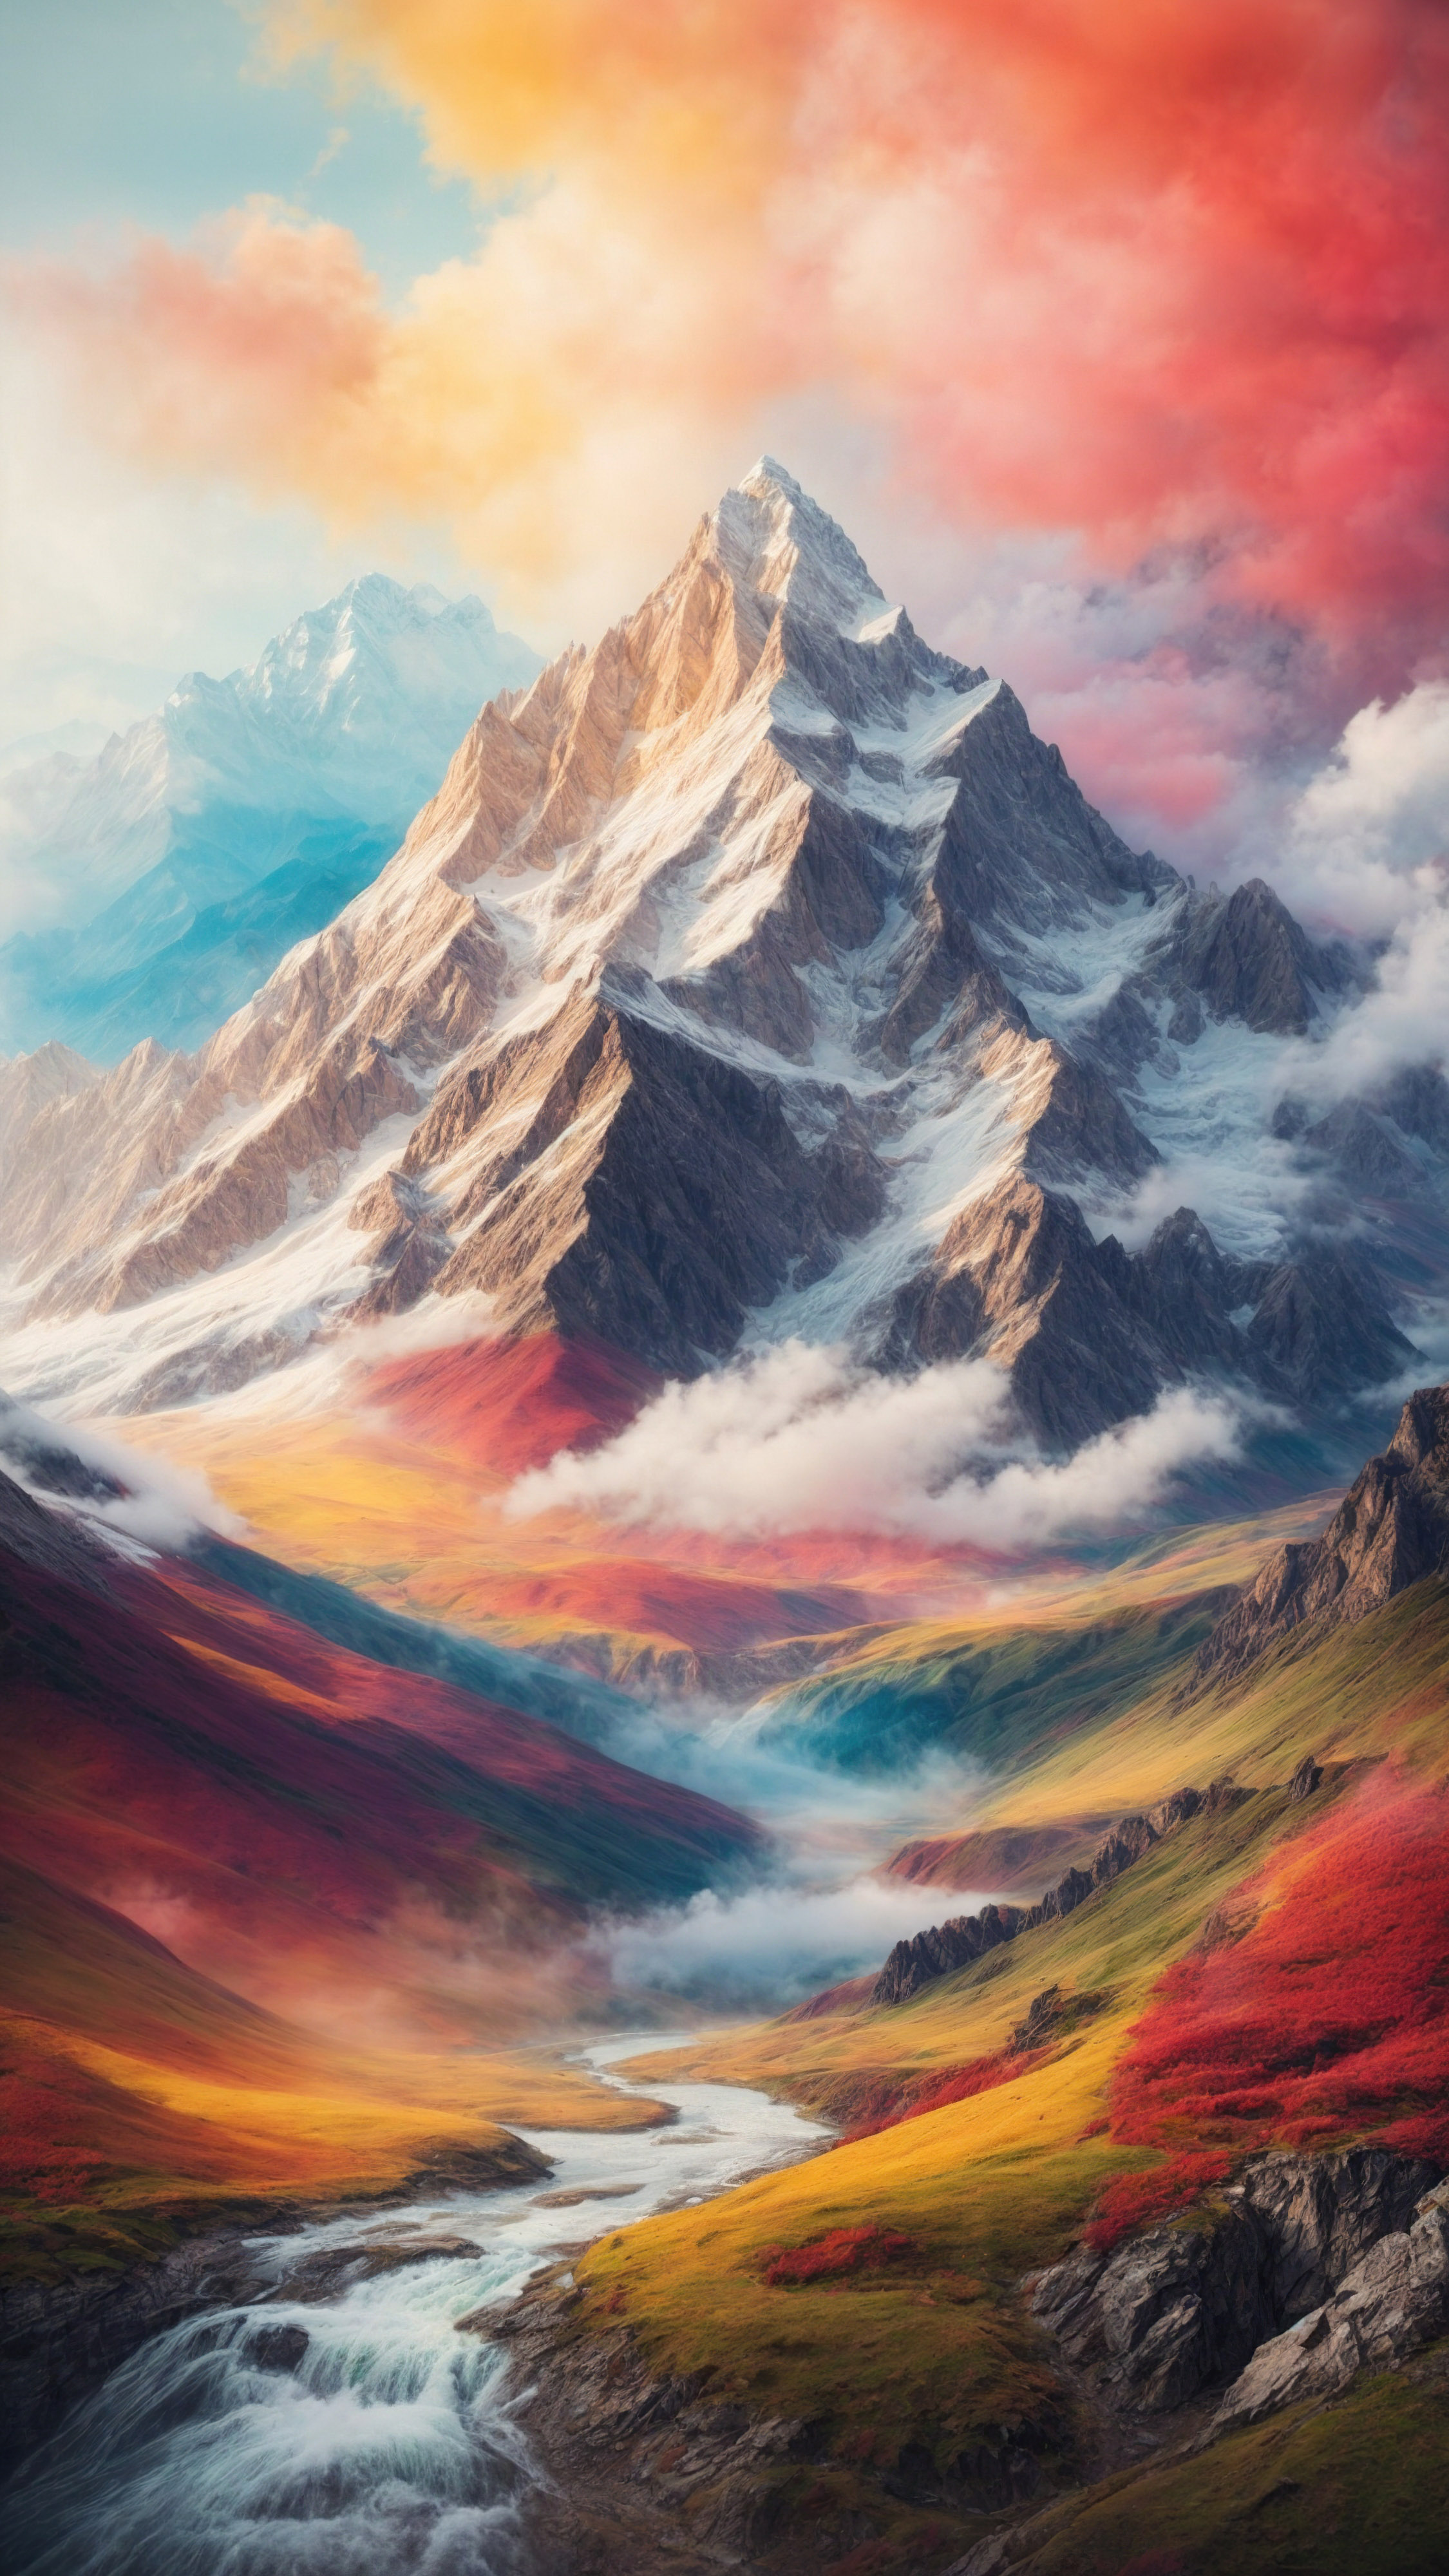 Appreciate the artistry of an artistic mountain with a painting style and brushstroke, set against a colorful background, with our iOS mountain wallpaper.